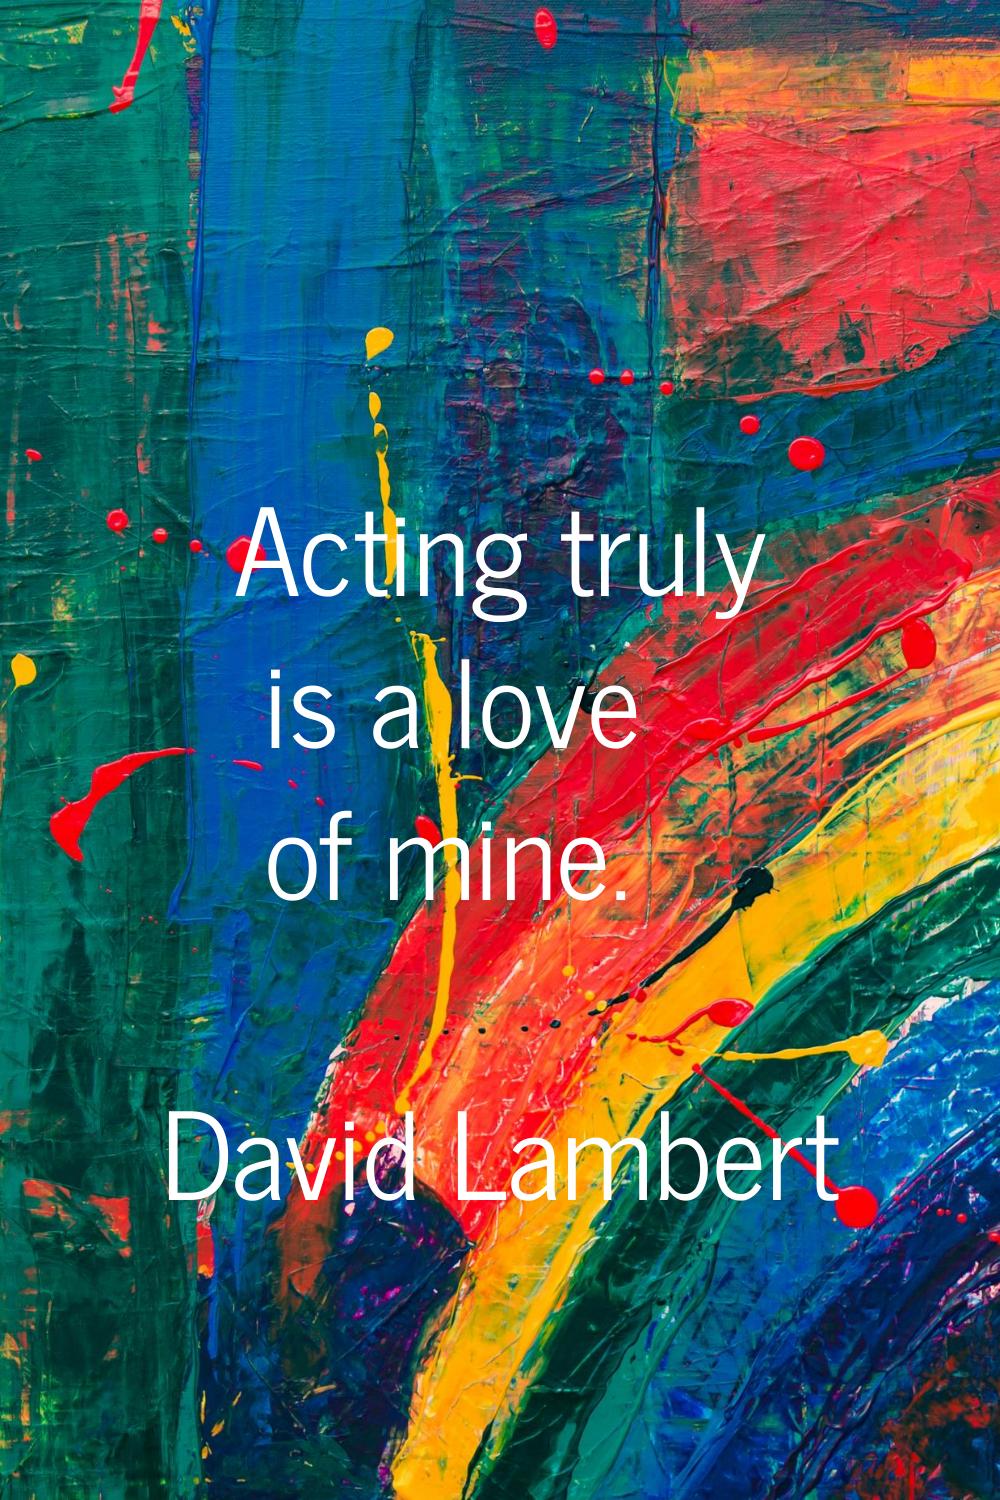 Acting truly is a love of mine.